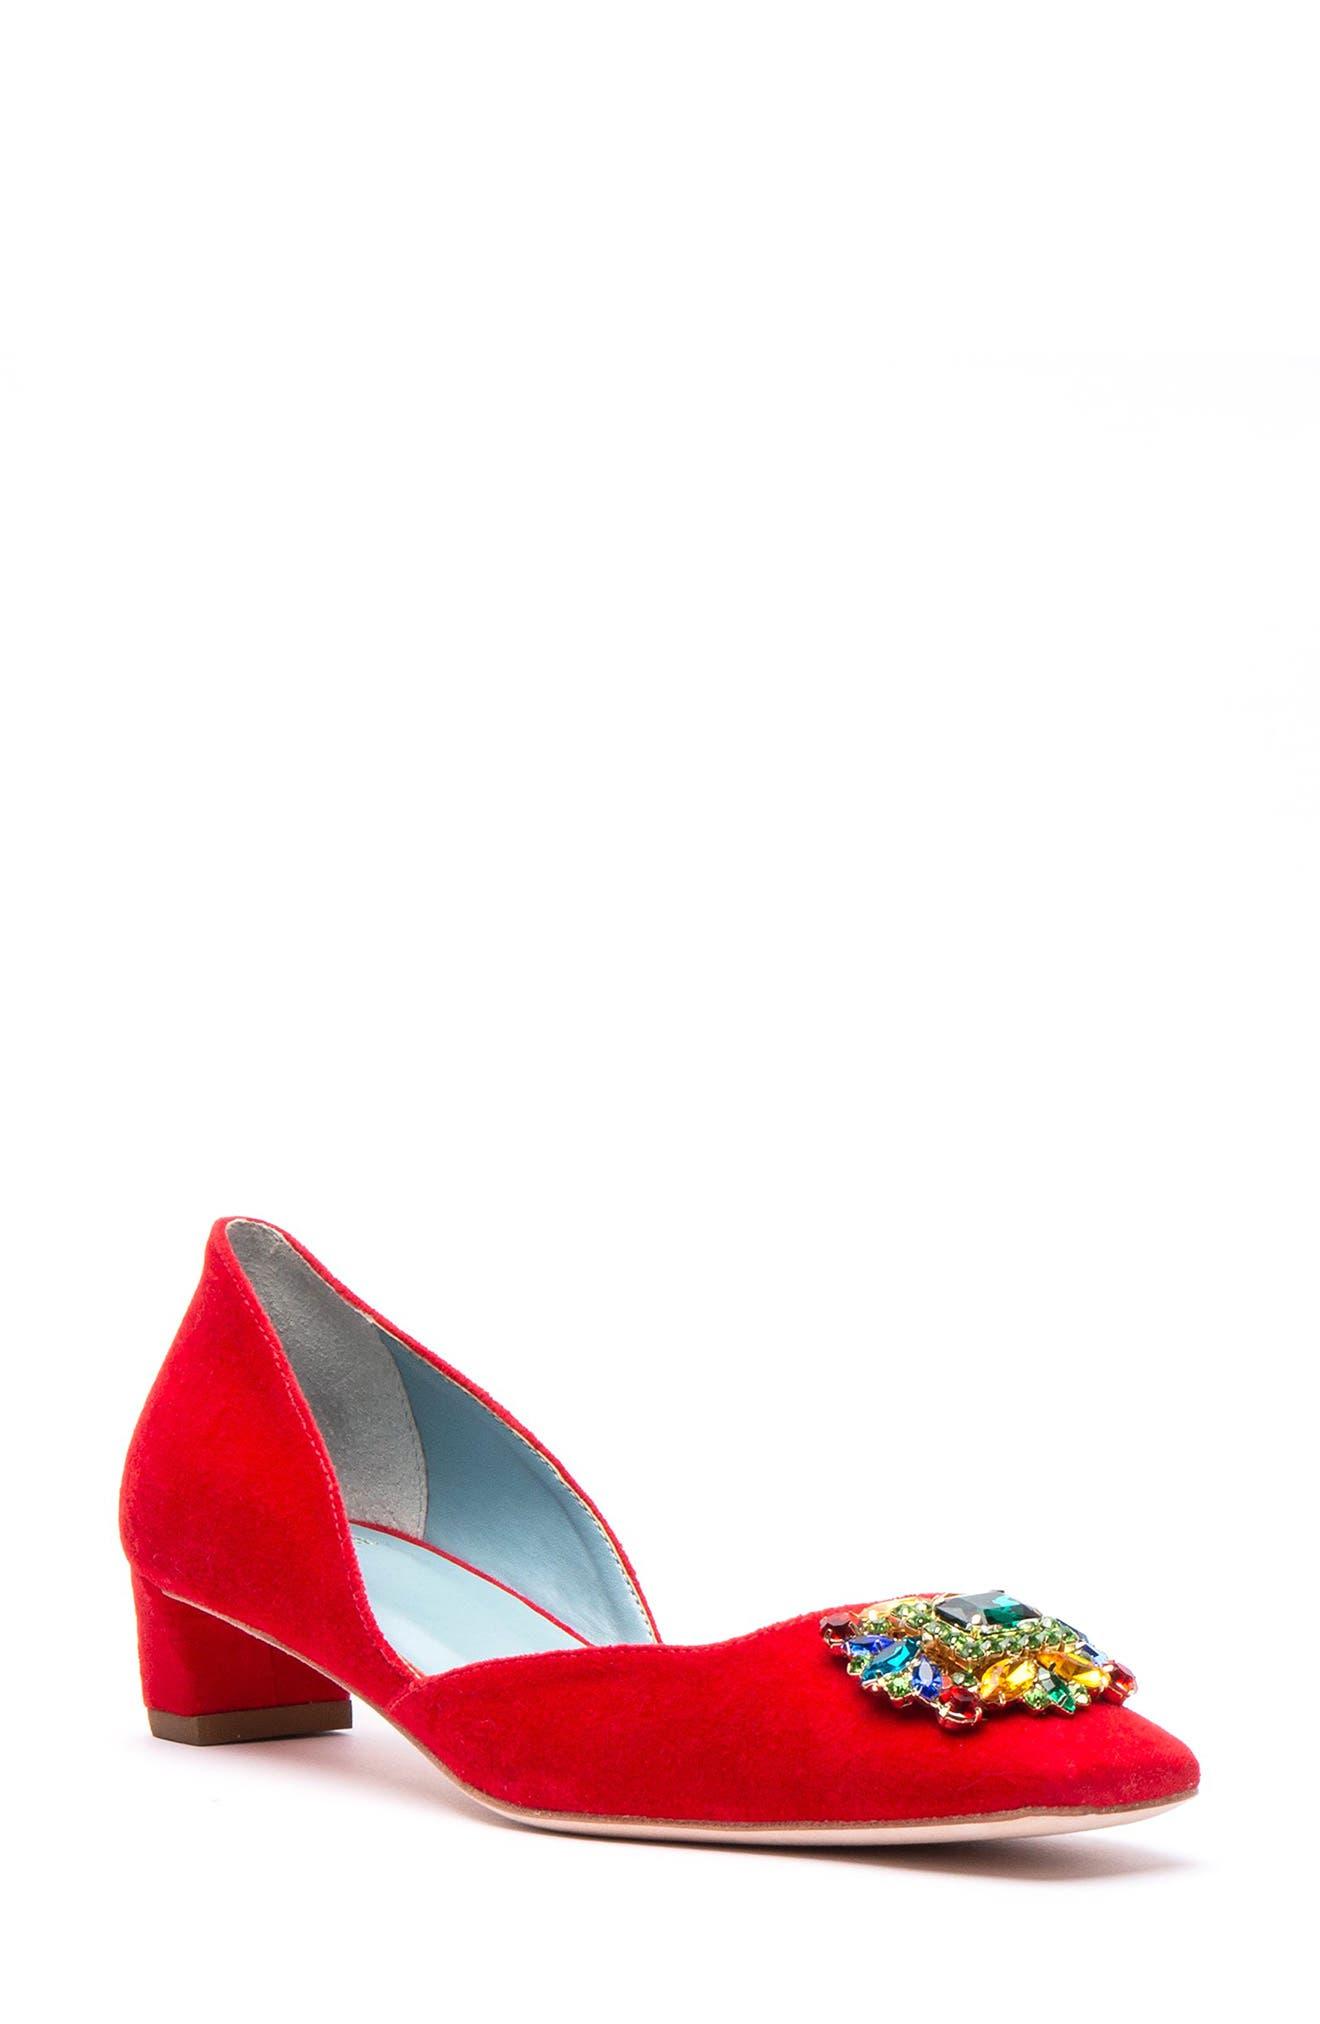 Frances Valentine Mccall D'orsay Pump in Red | Lyst